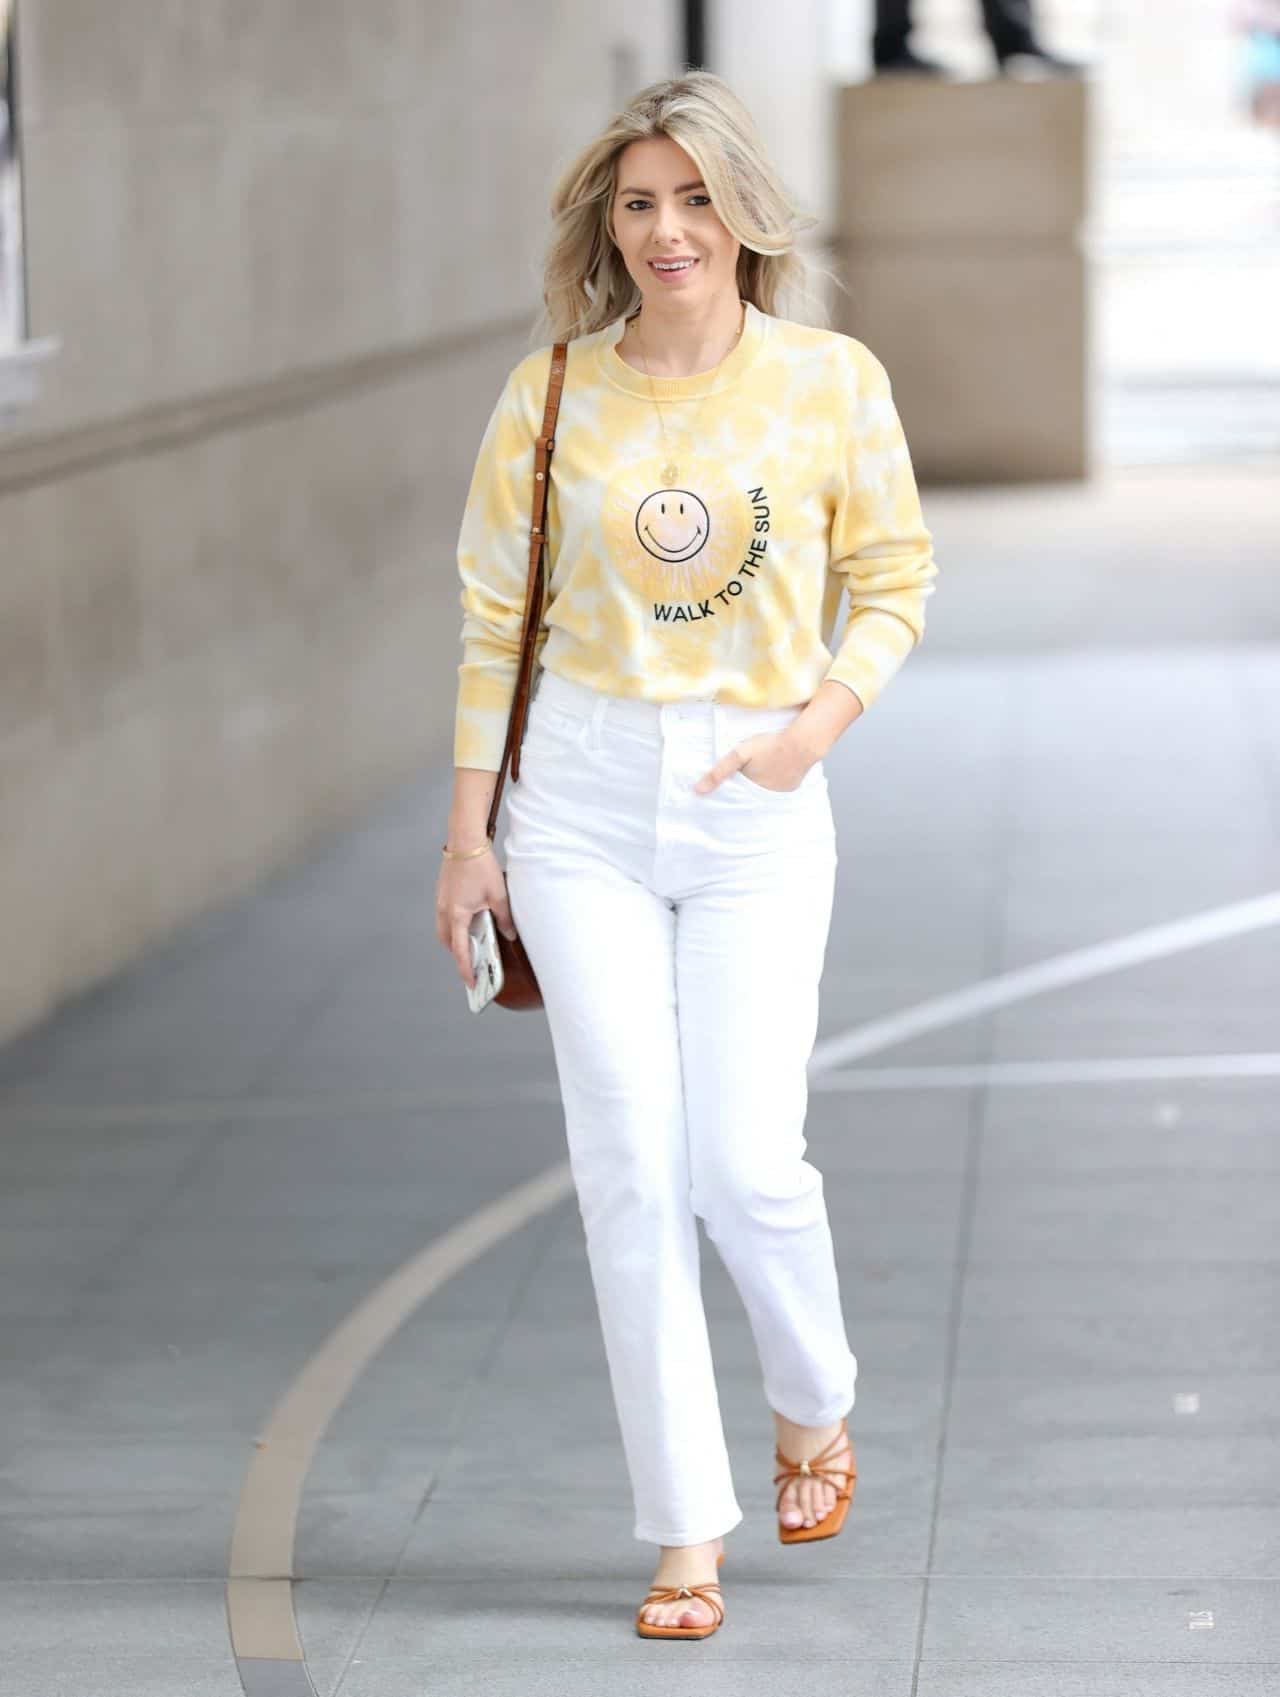 mollie king wears yellow sweater and white jeans on her way to bbc radio 1 4